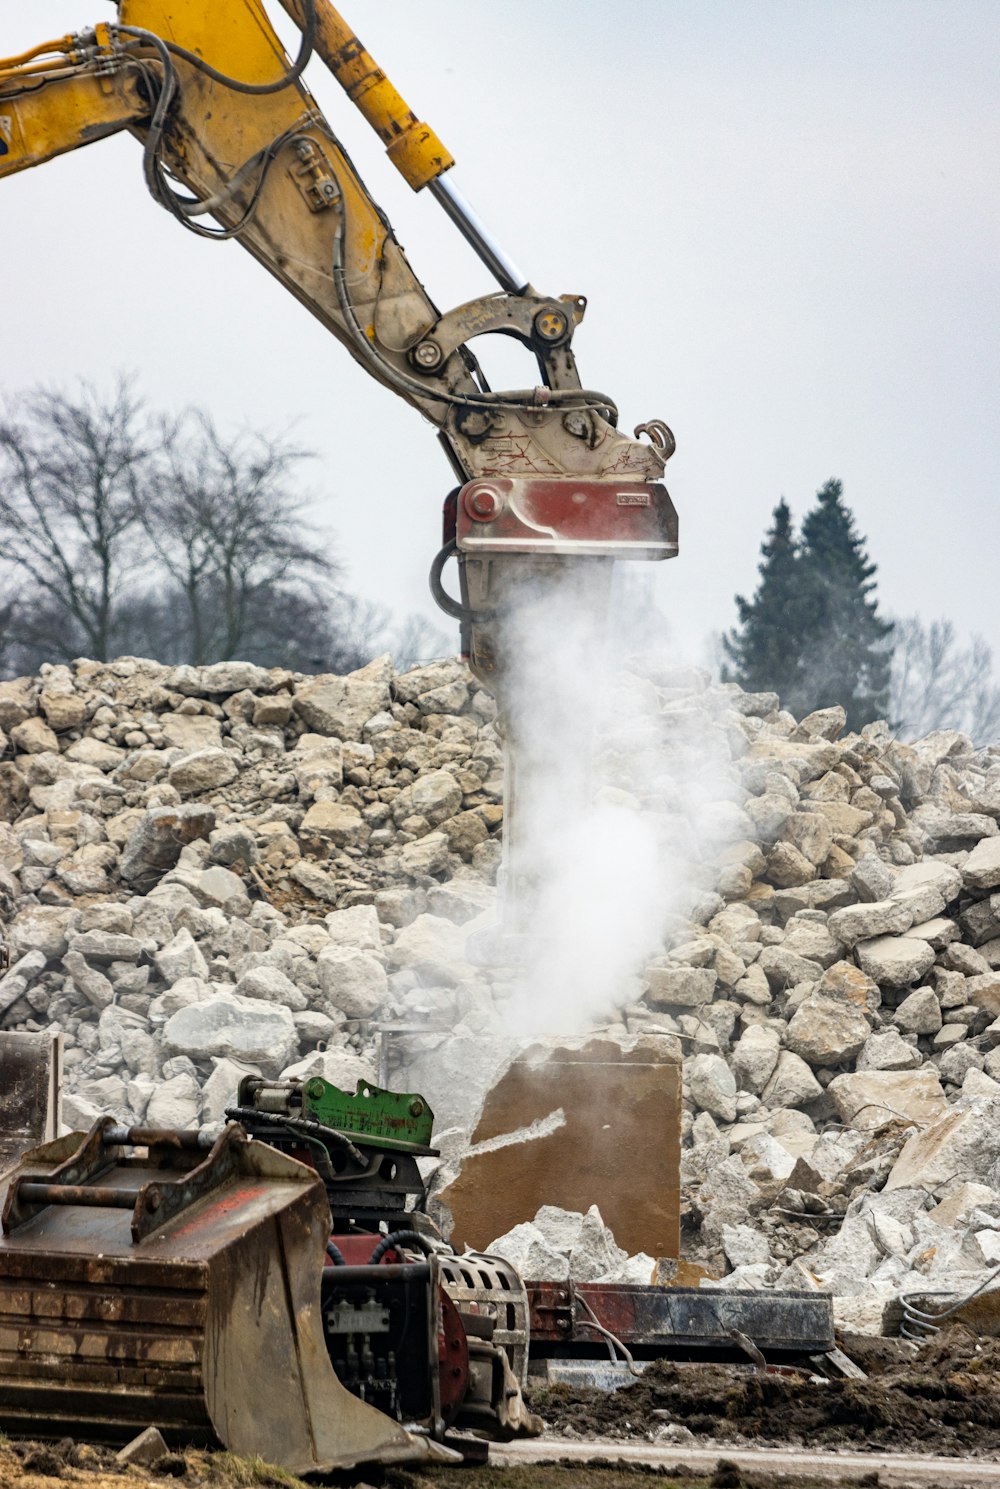 a construction site with a large excavator and a pile of rubble